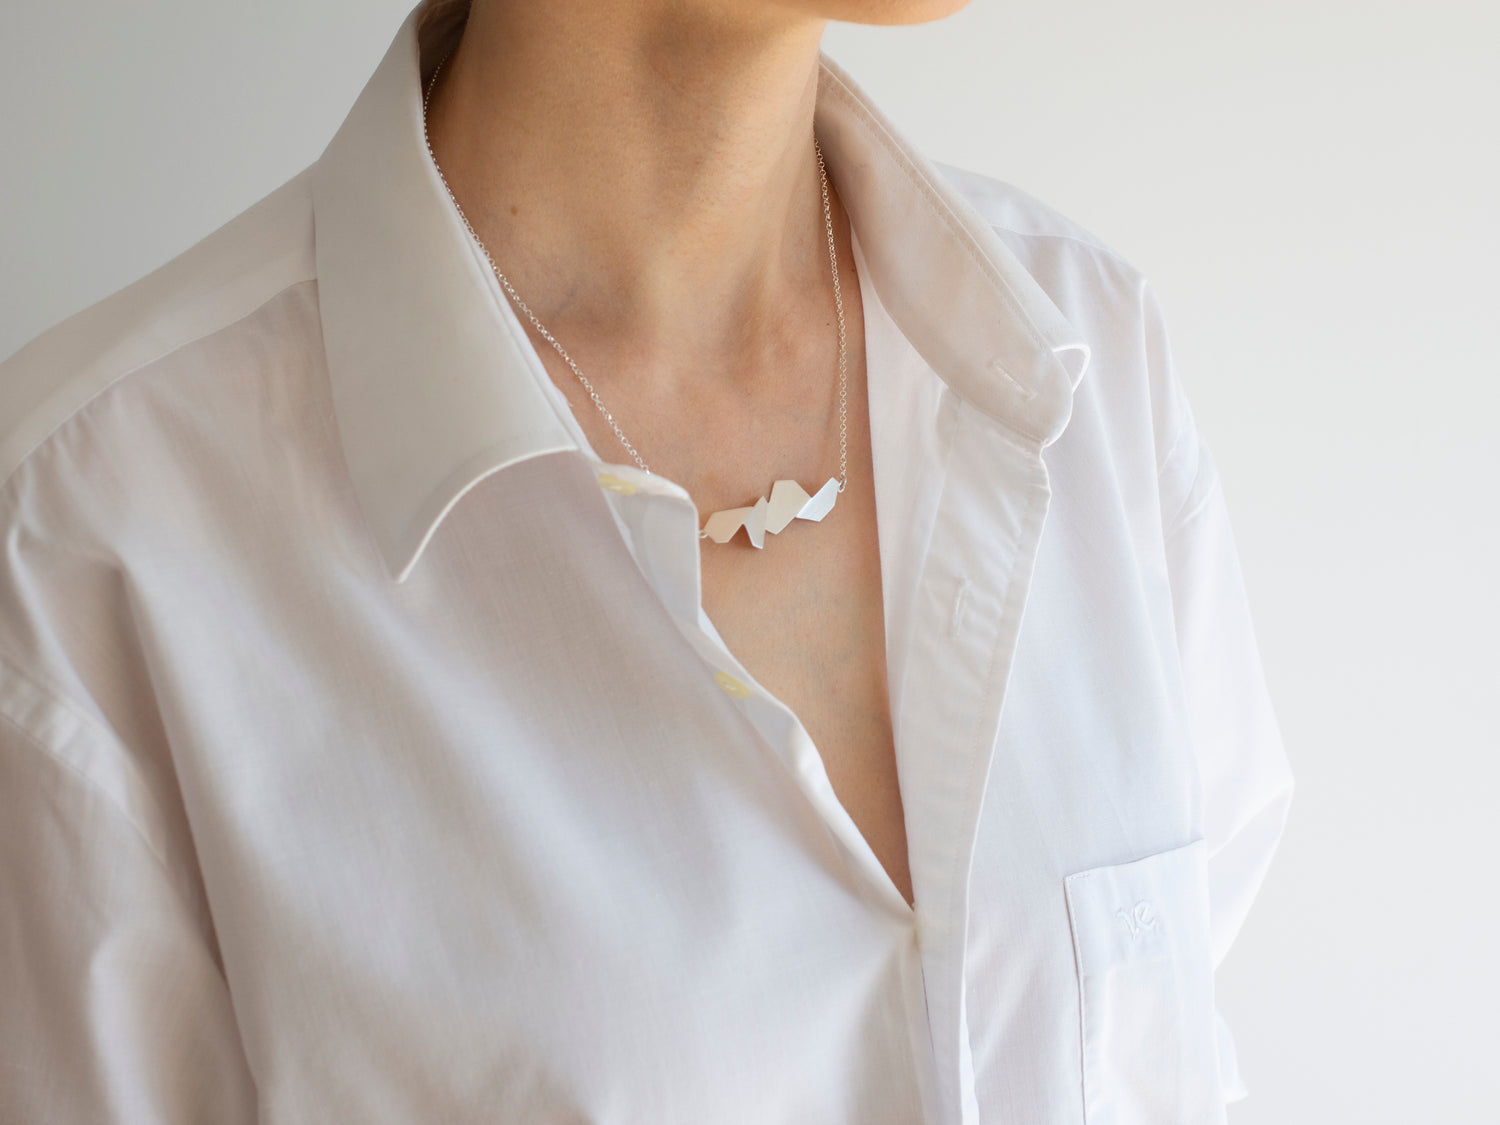 A white shirt styled with geometric sterling silver necklace